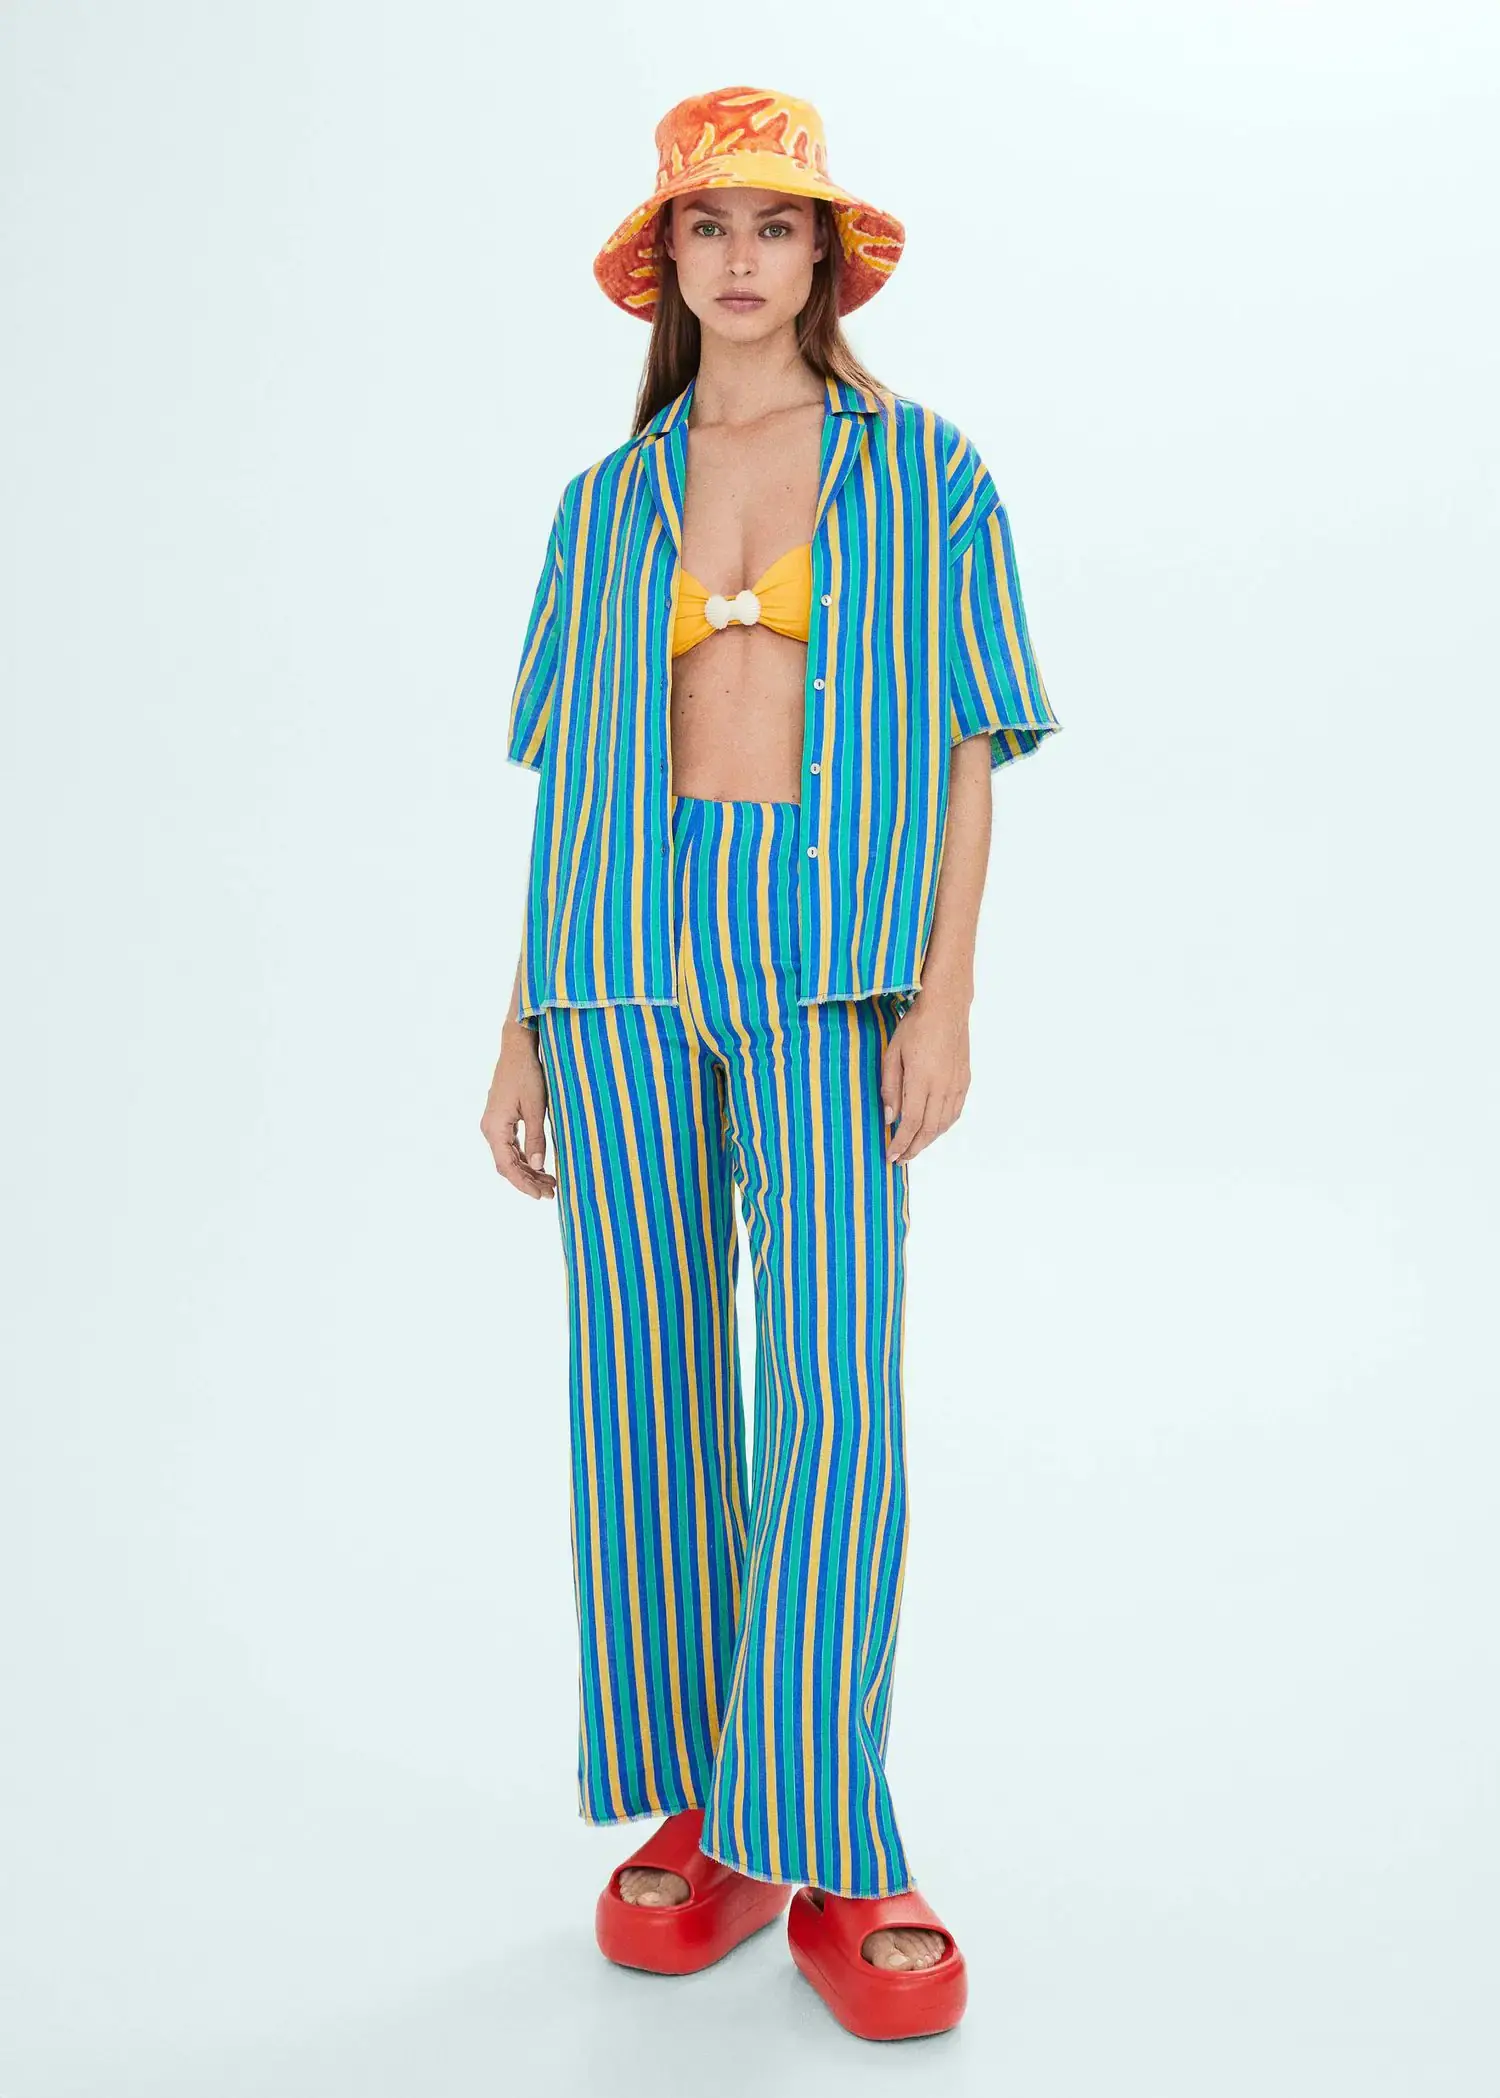 Mango Multi-coloured striped linen shirt. a woman in a blue and white striped outfit. 